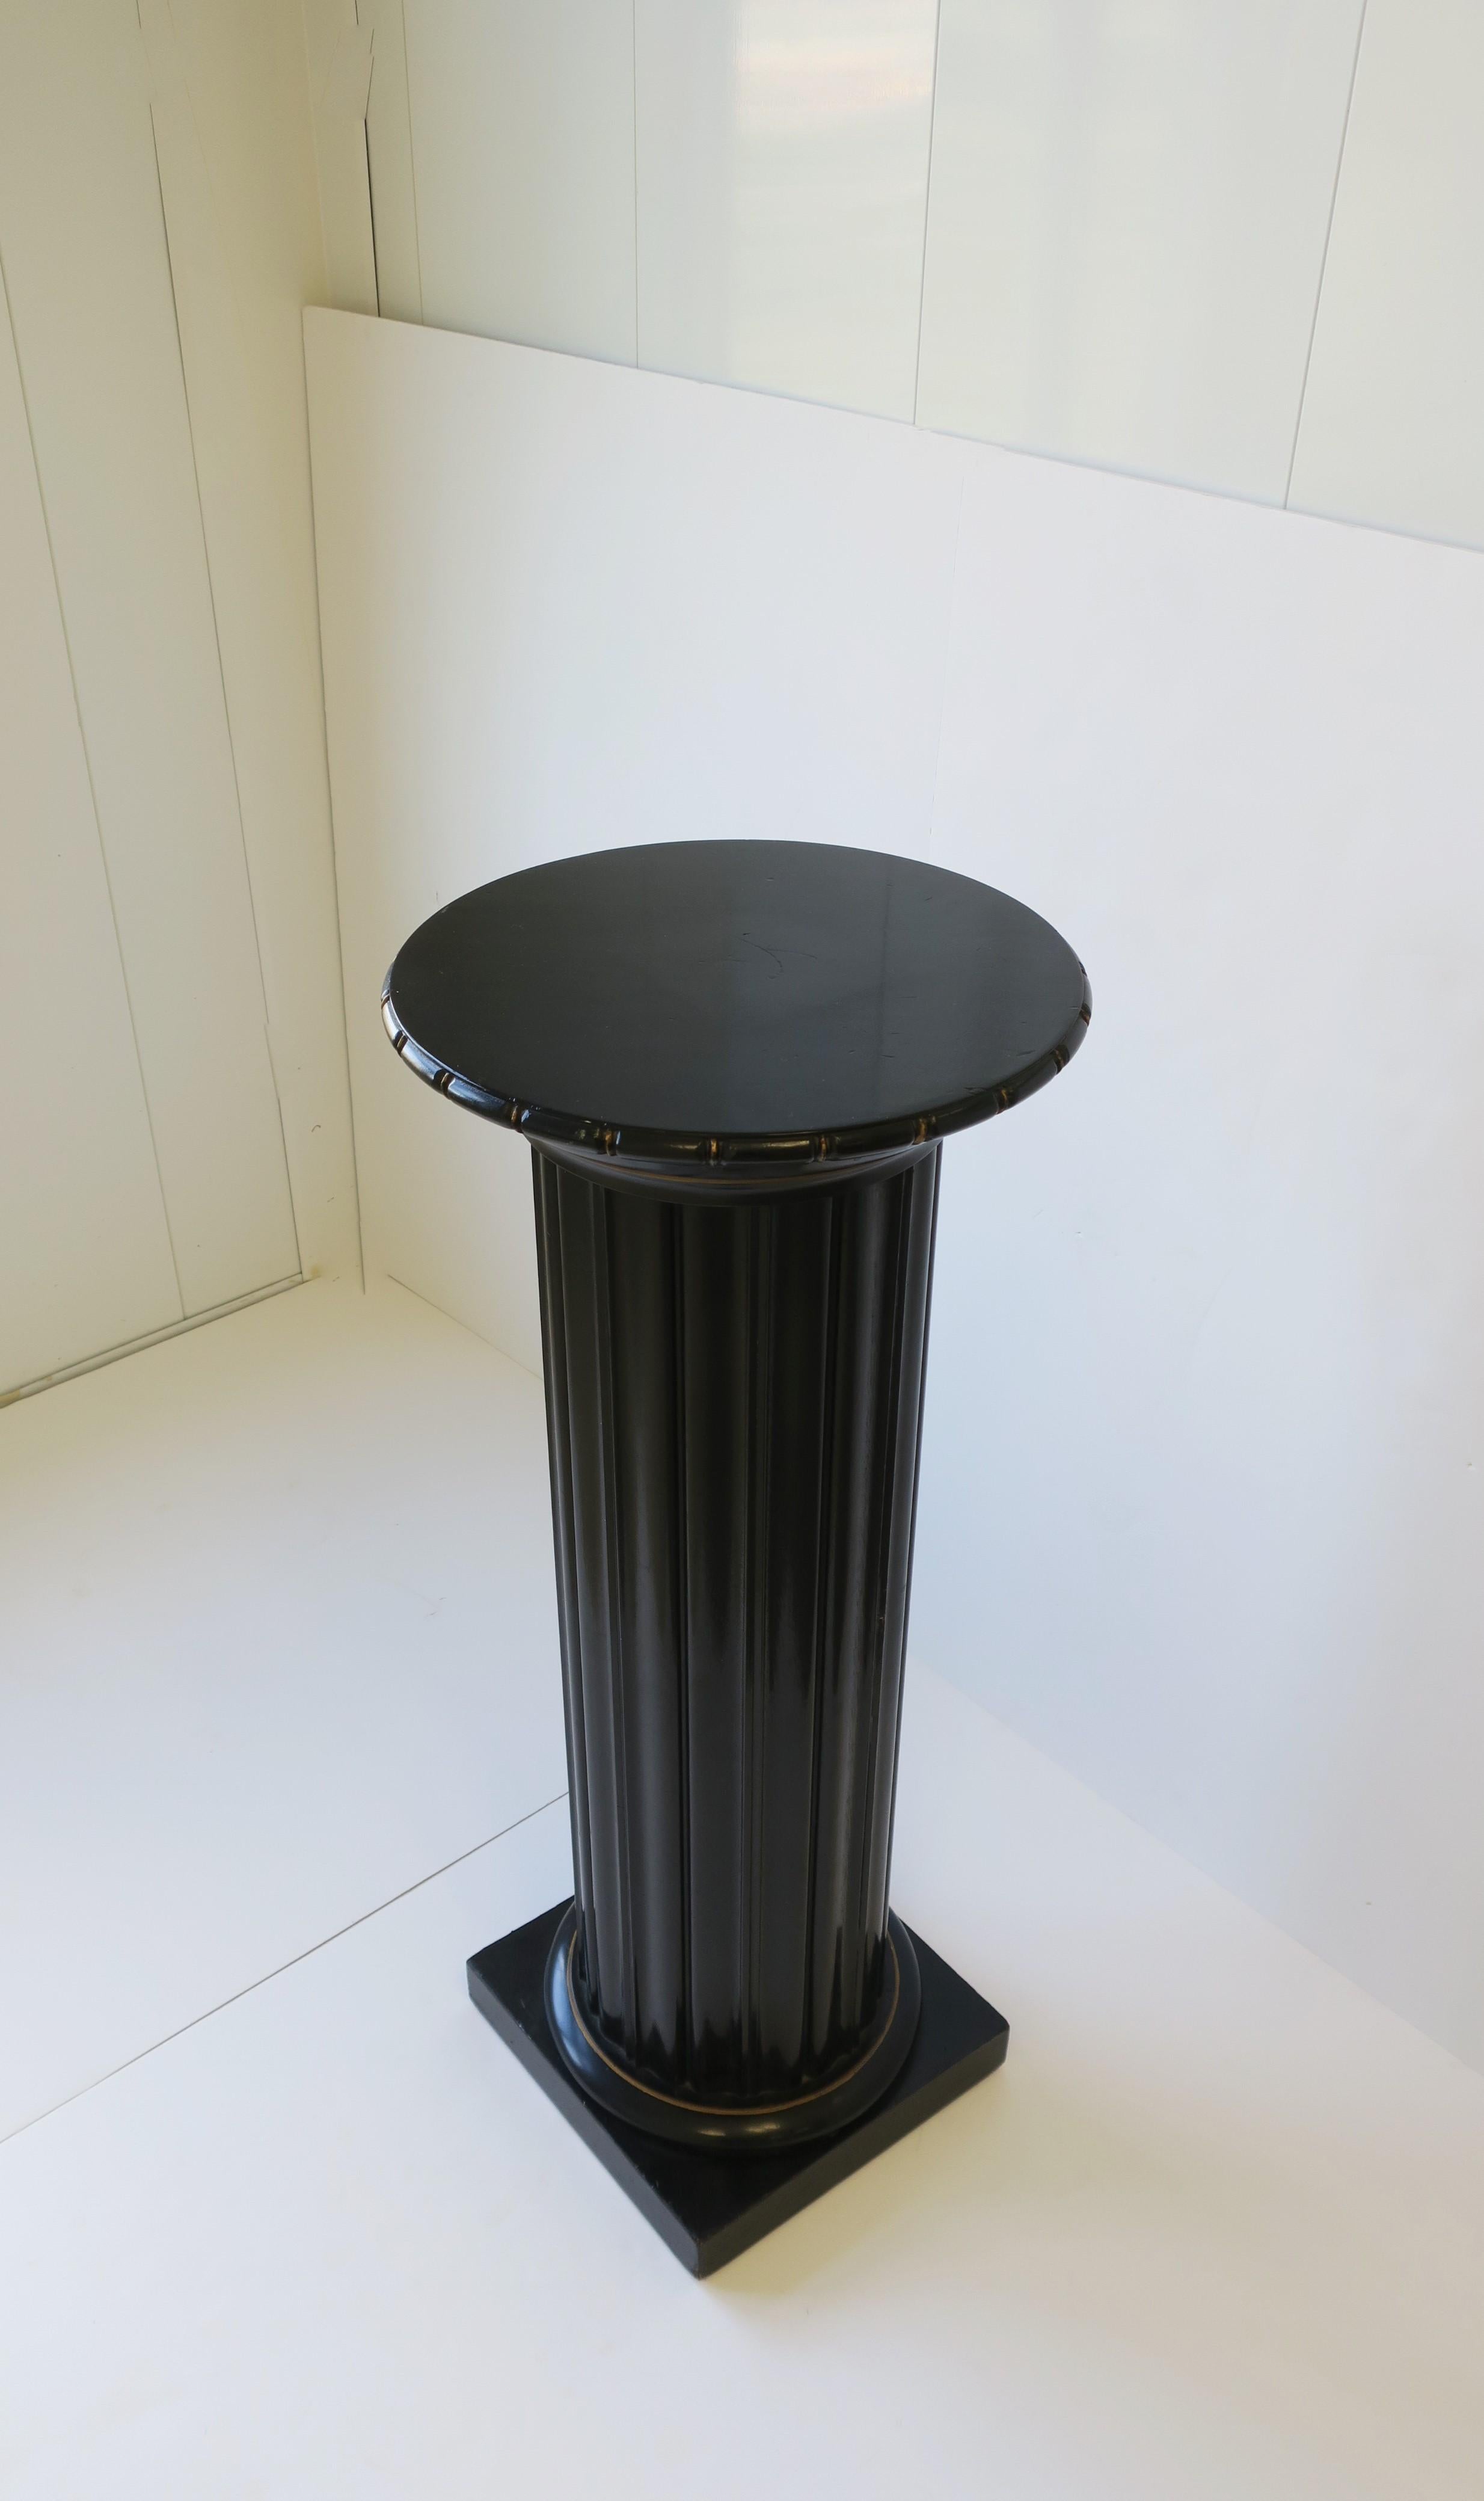 Lacquered Black Lacquer Wood Pillar Column Pedestal Stand in the Neoclassical Design